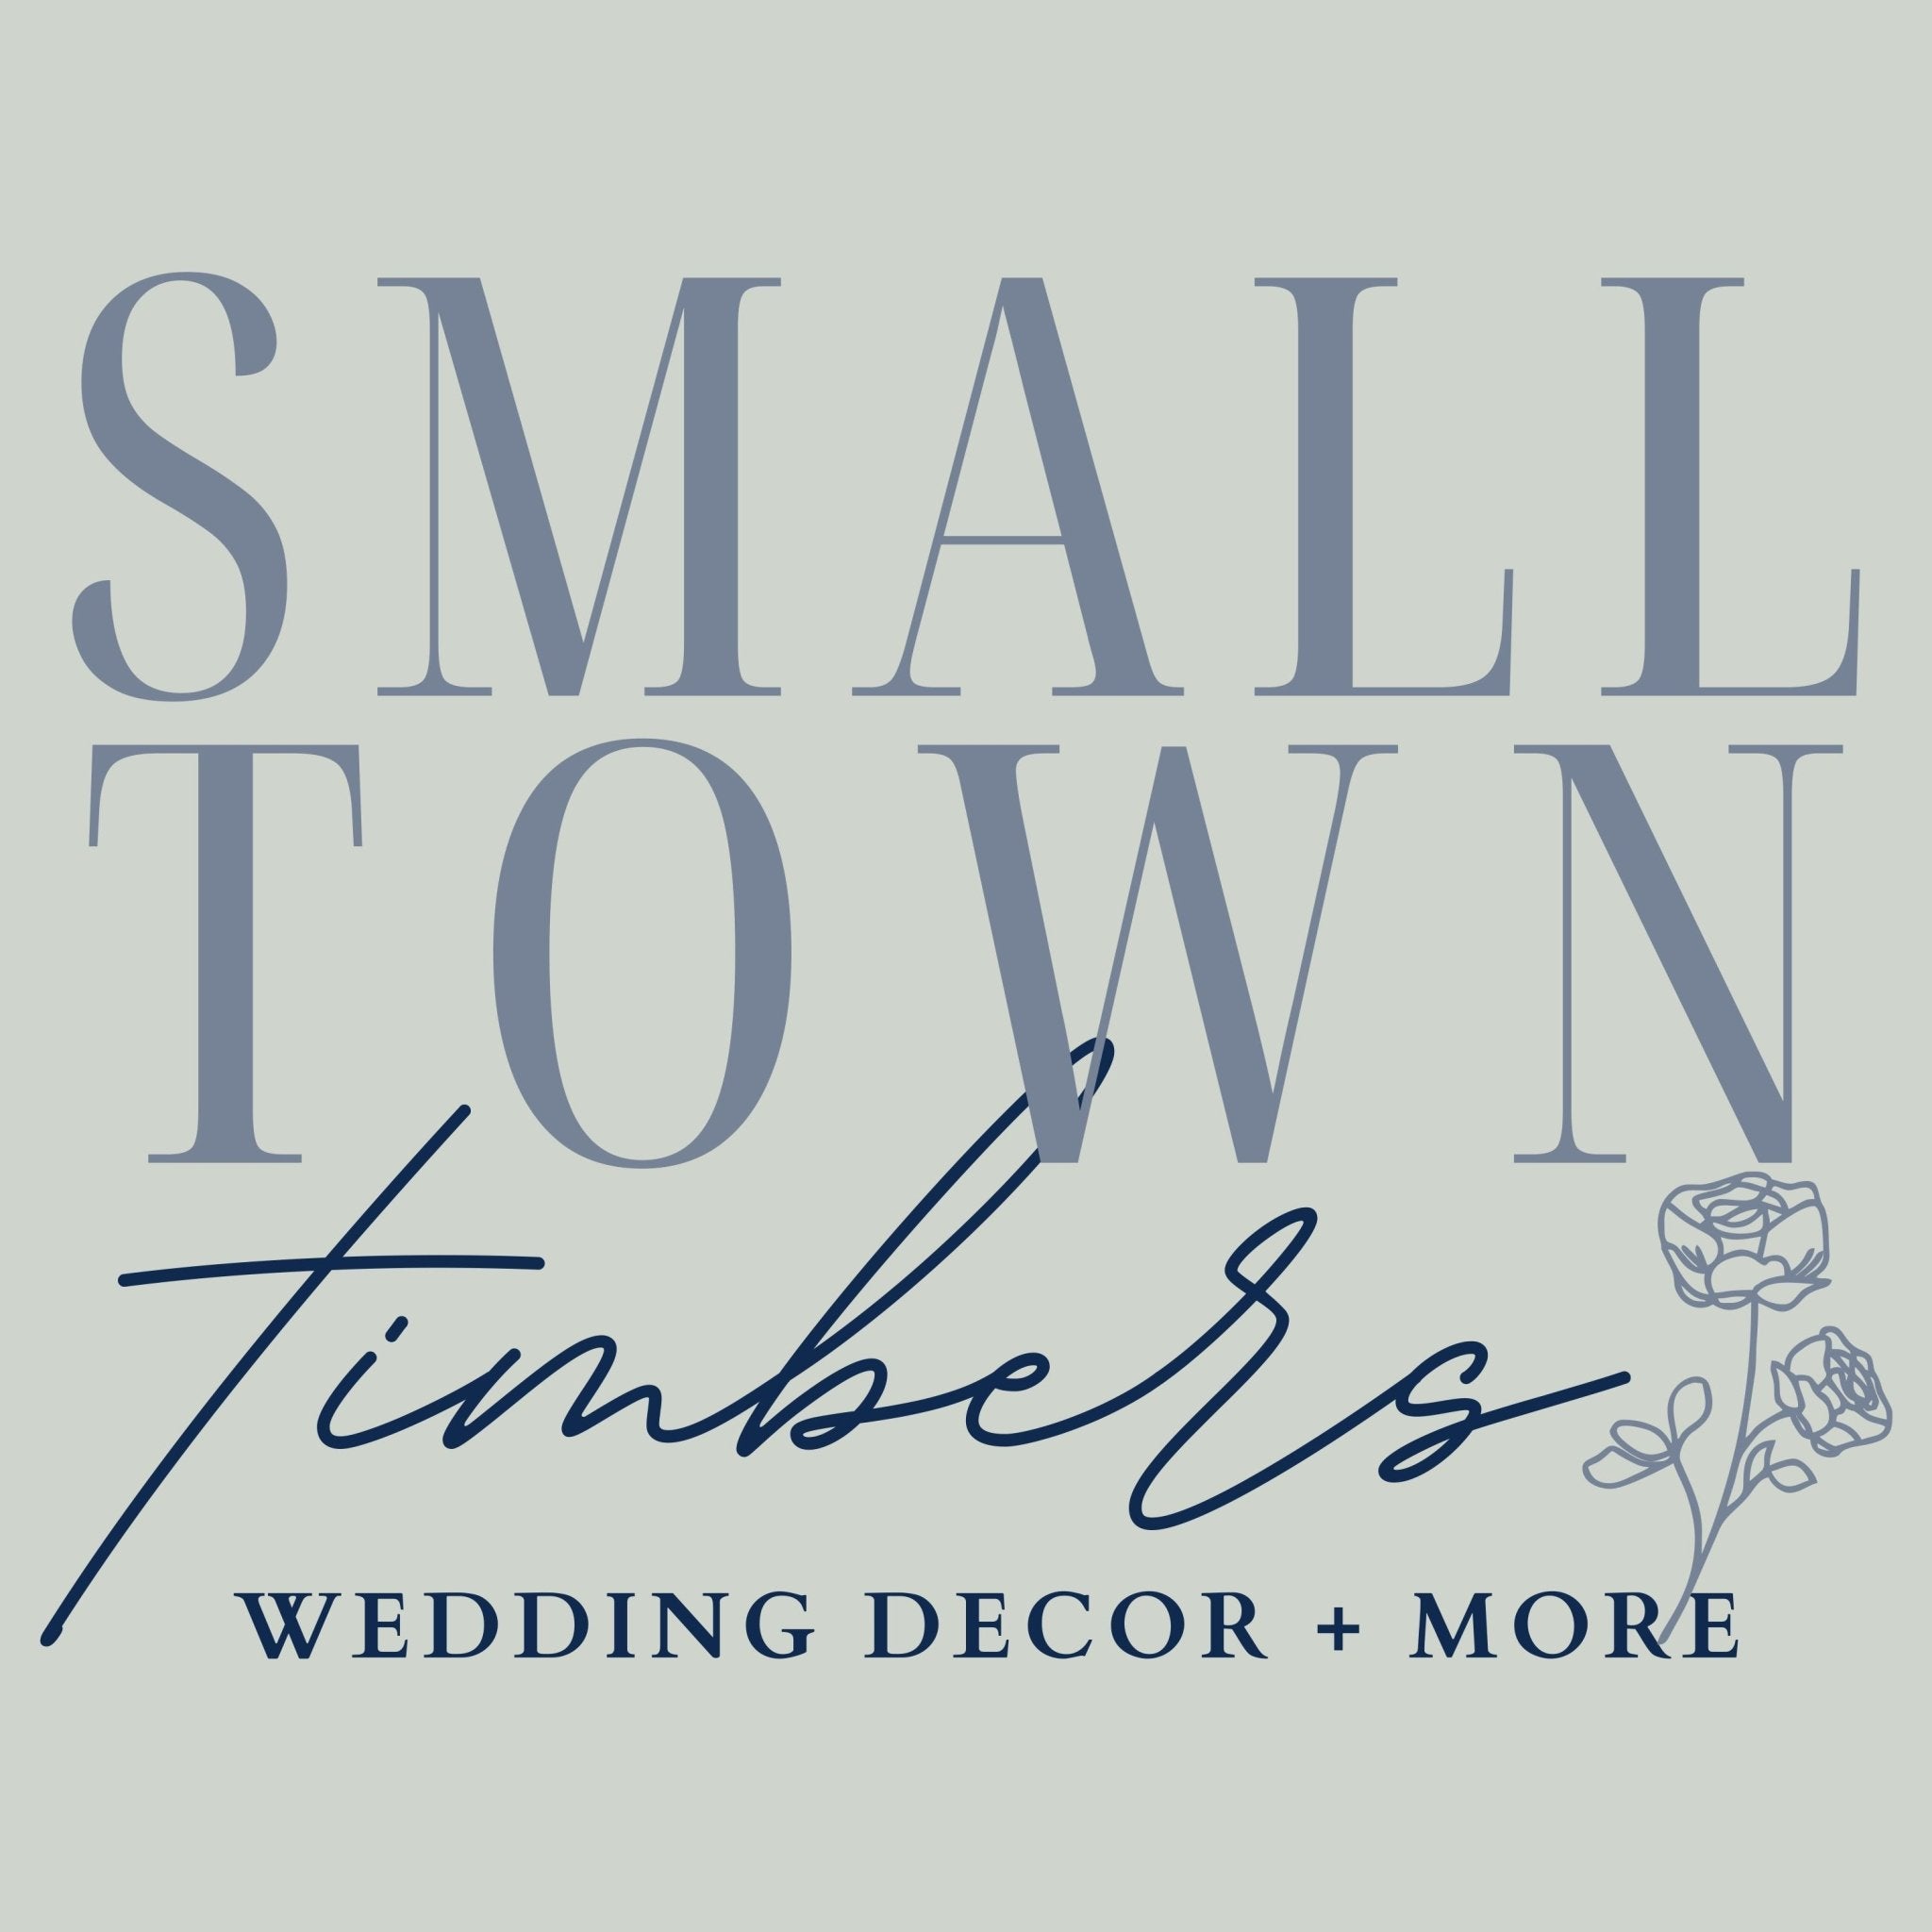 VINCE & EMILY WEDDING WELCOME SIGN - Small Town Timbers